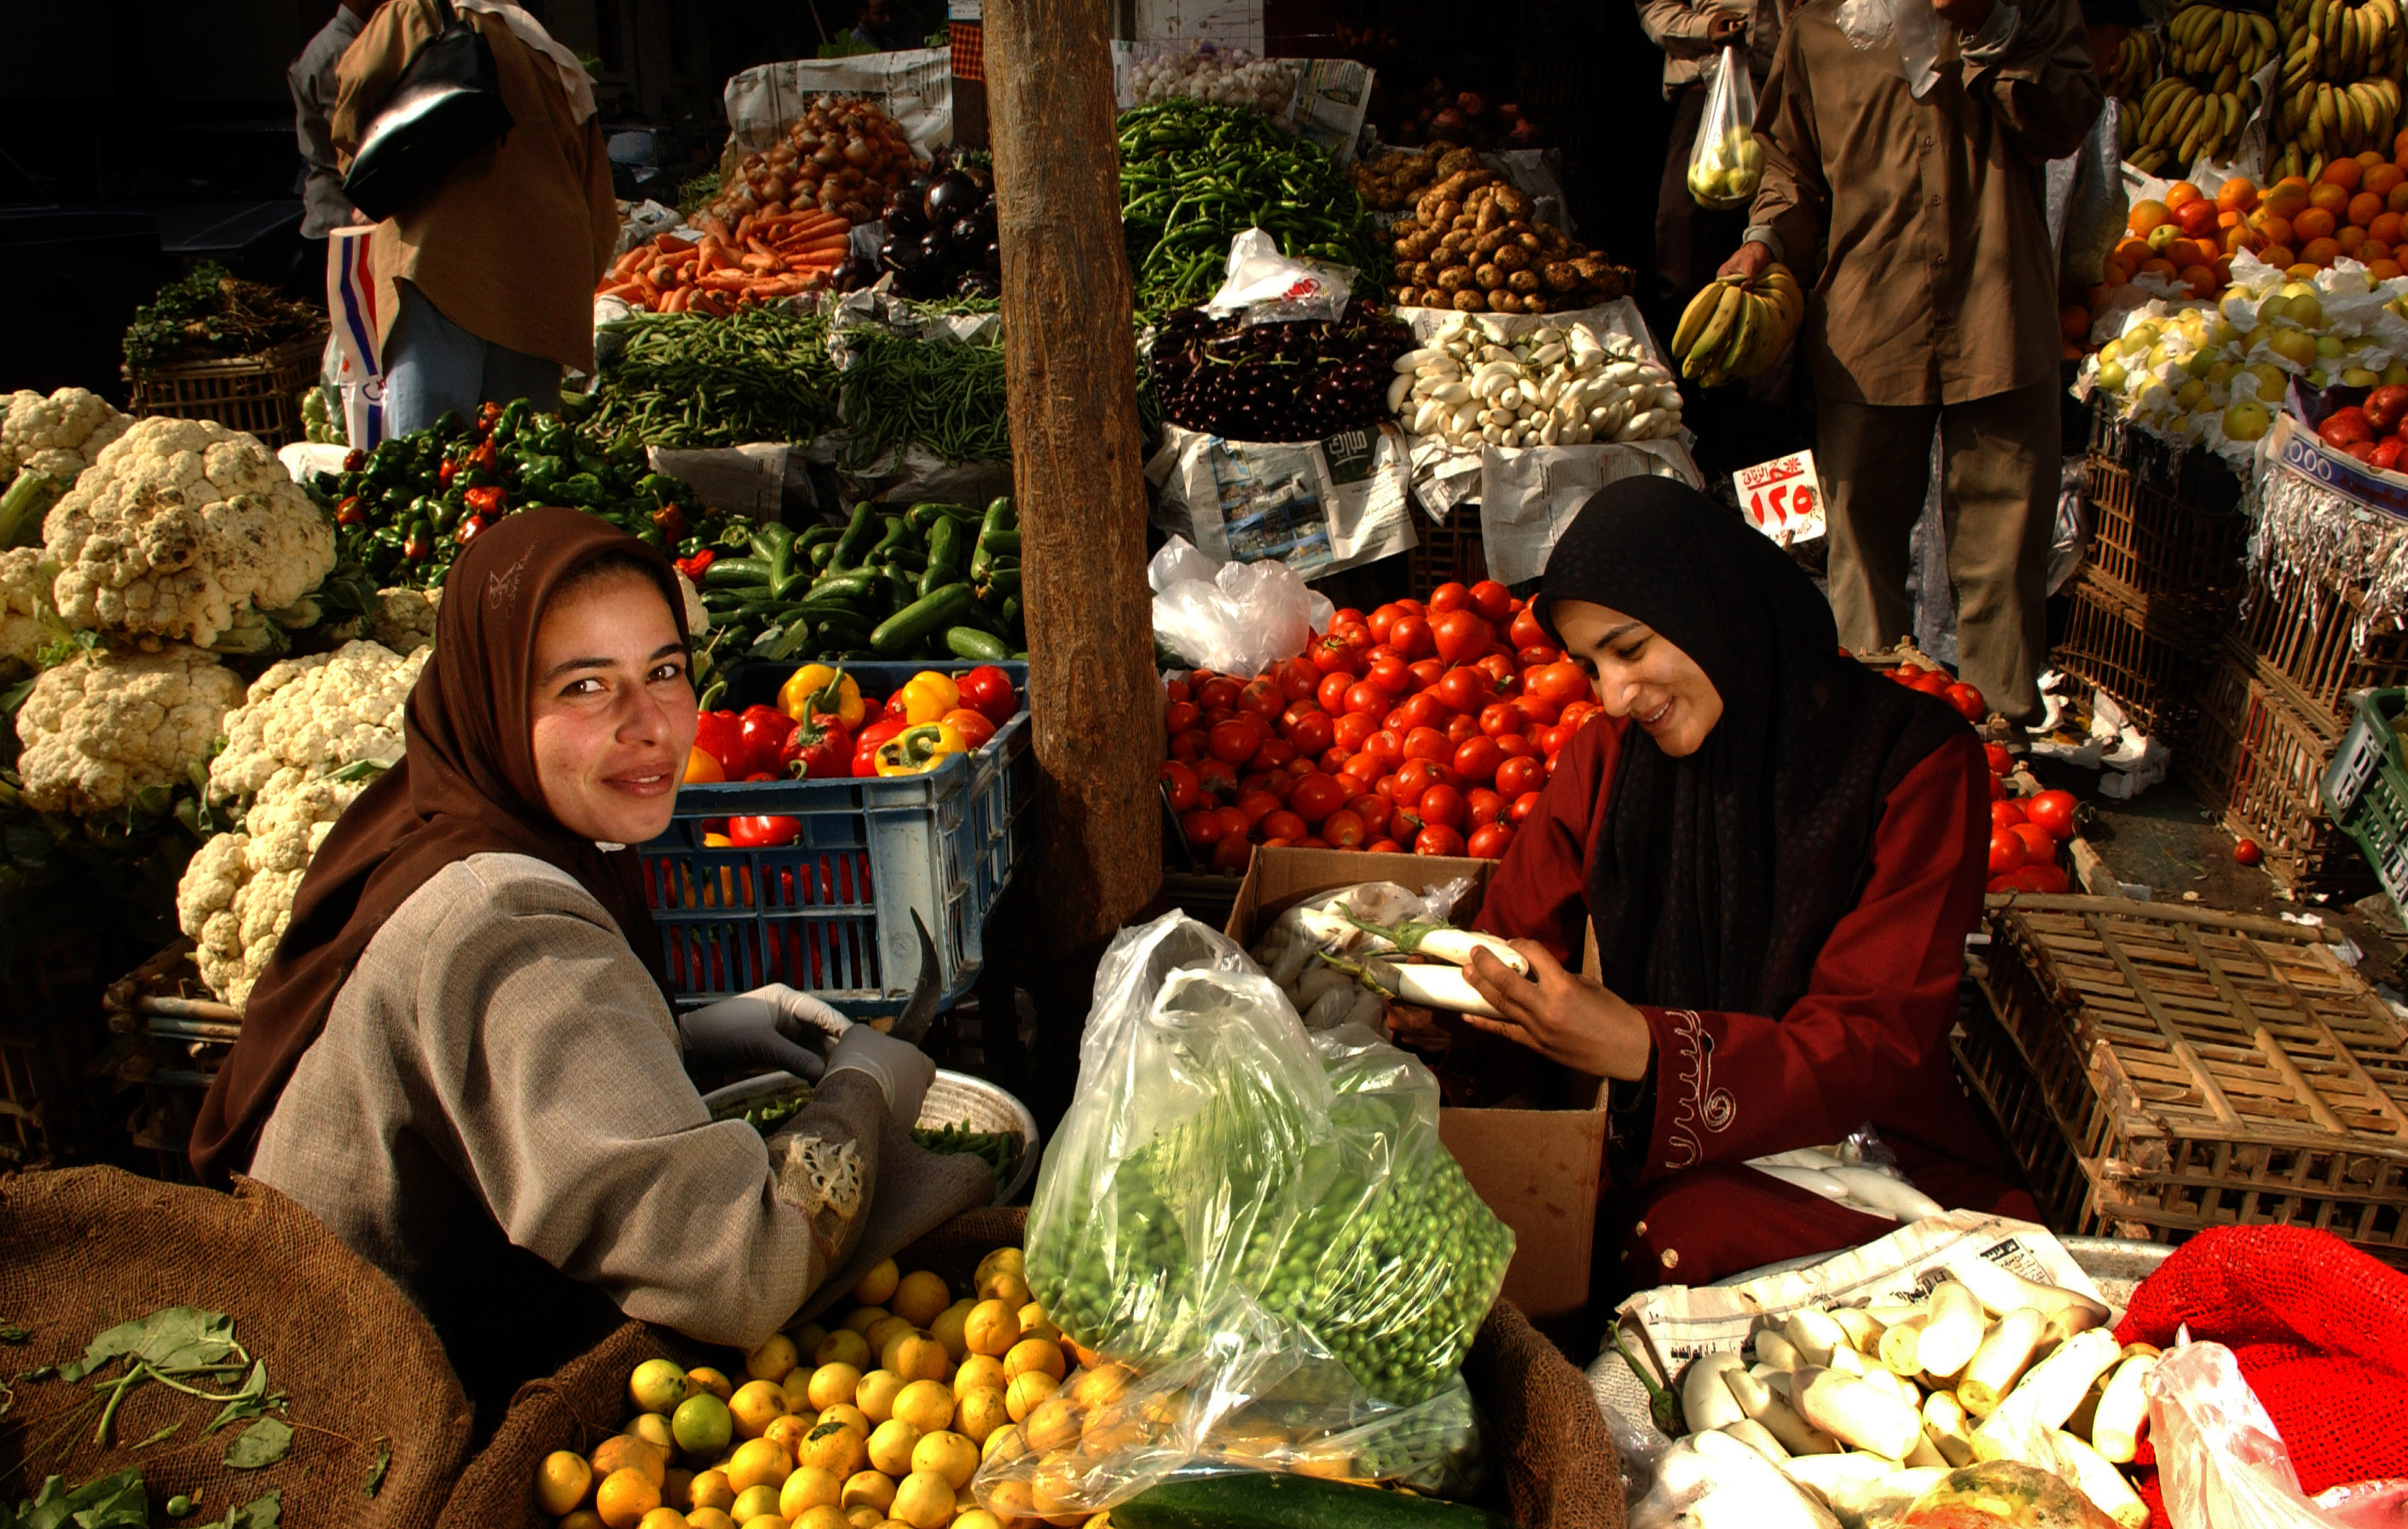 Two women at a market selling fresh produce